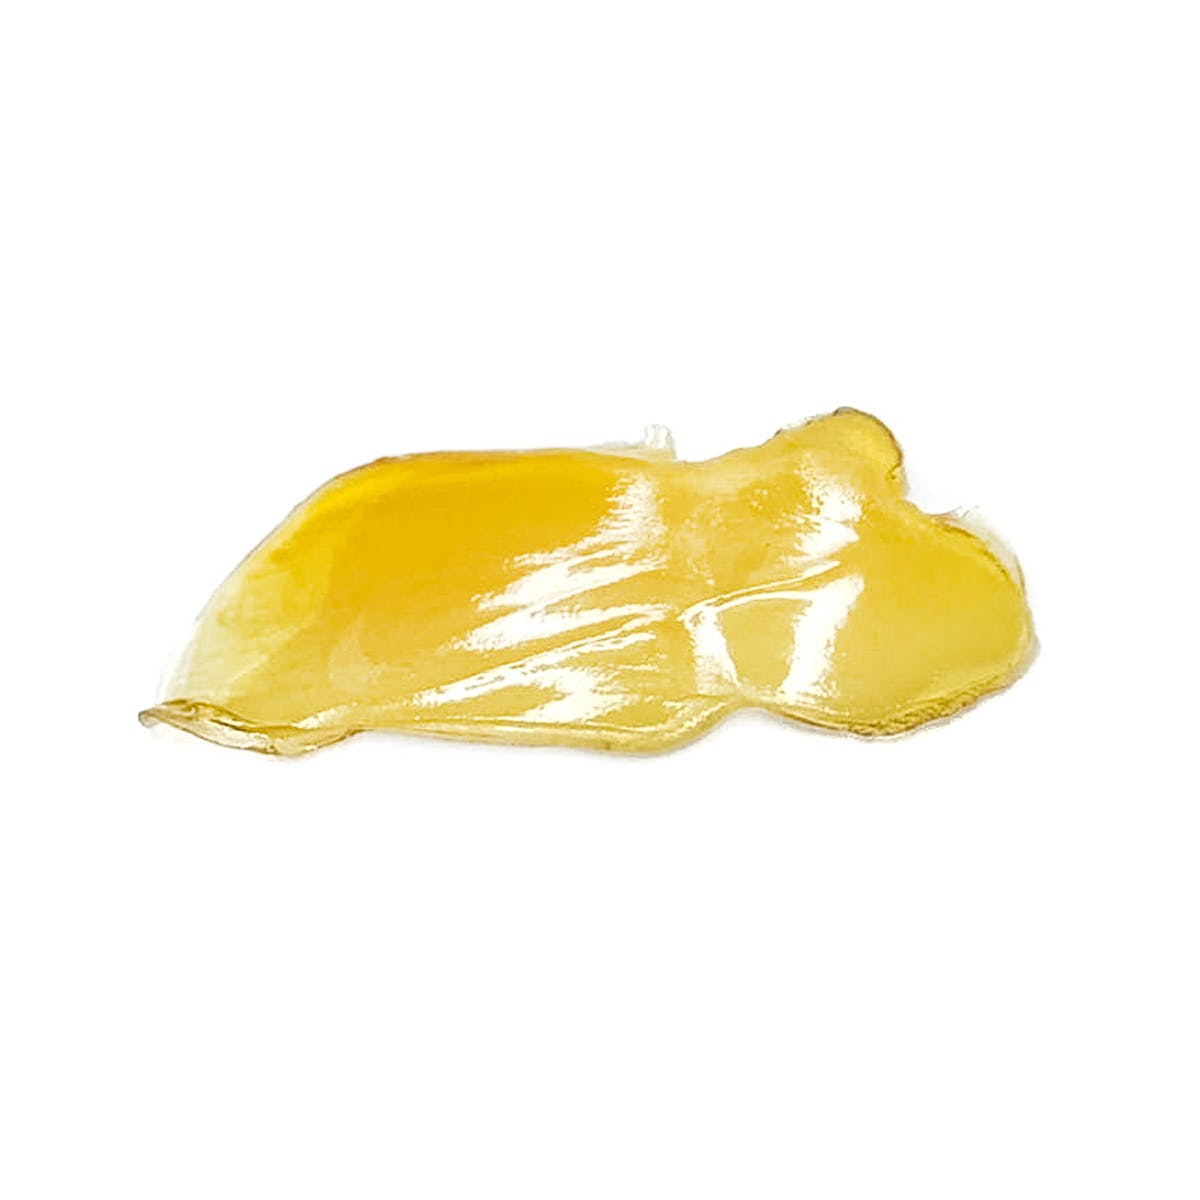 Clementine Live Resin Shatter